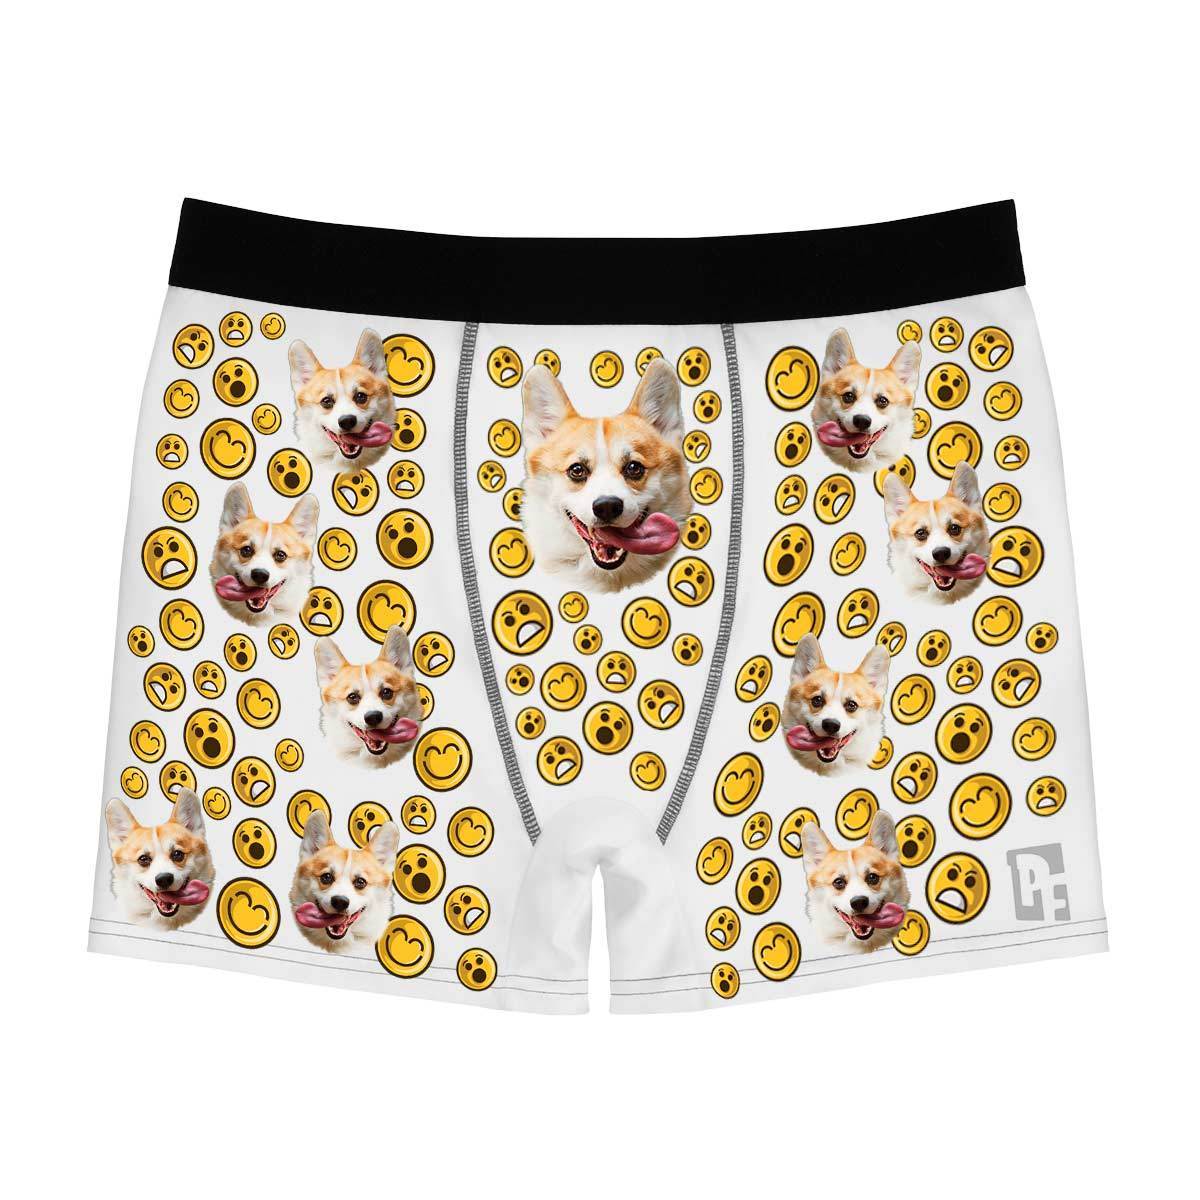 White Smiles men's boxer briefs personalized with photo printed on them